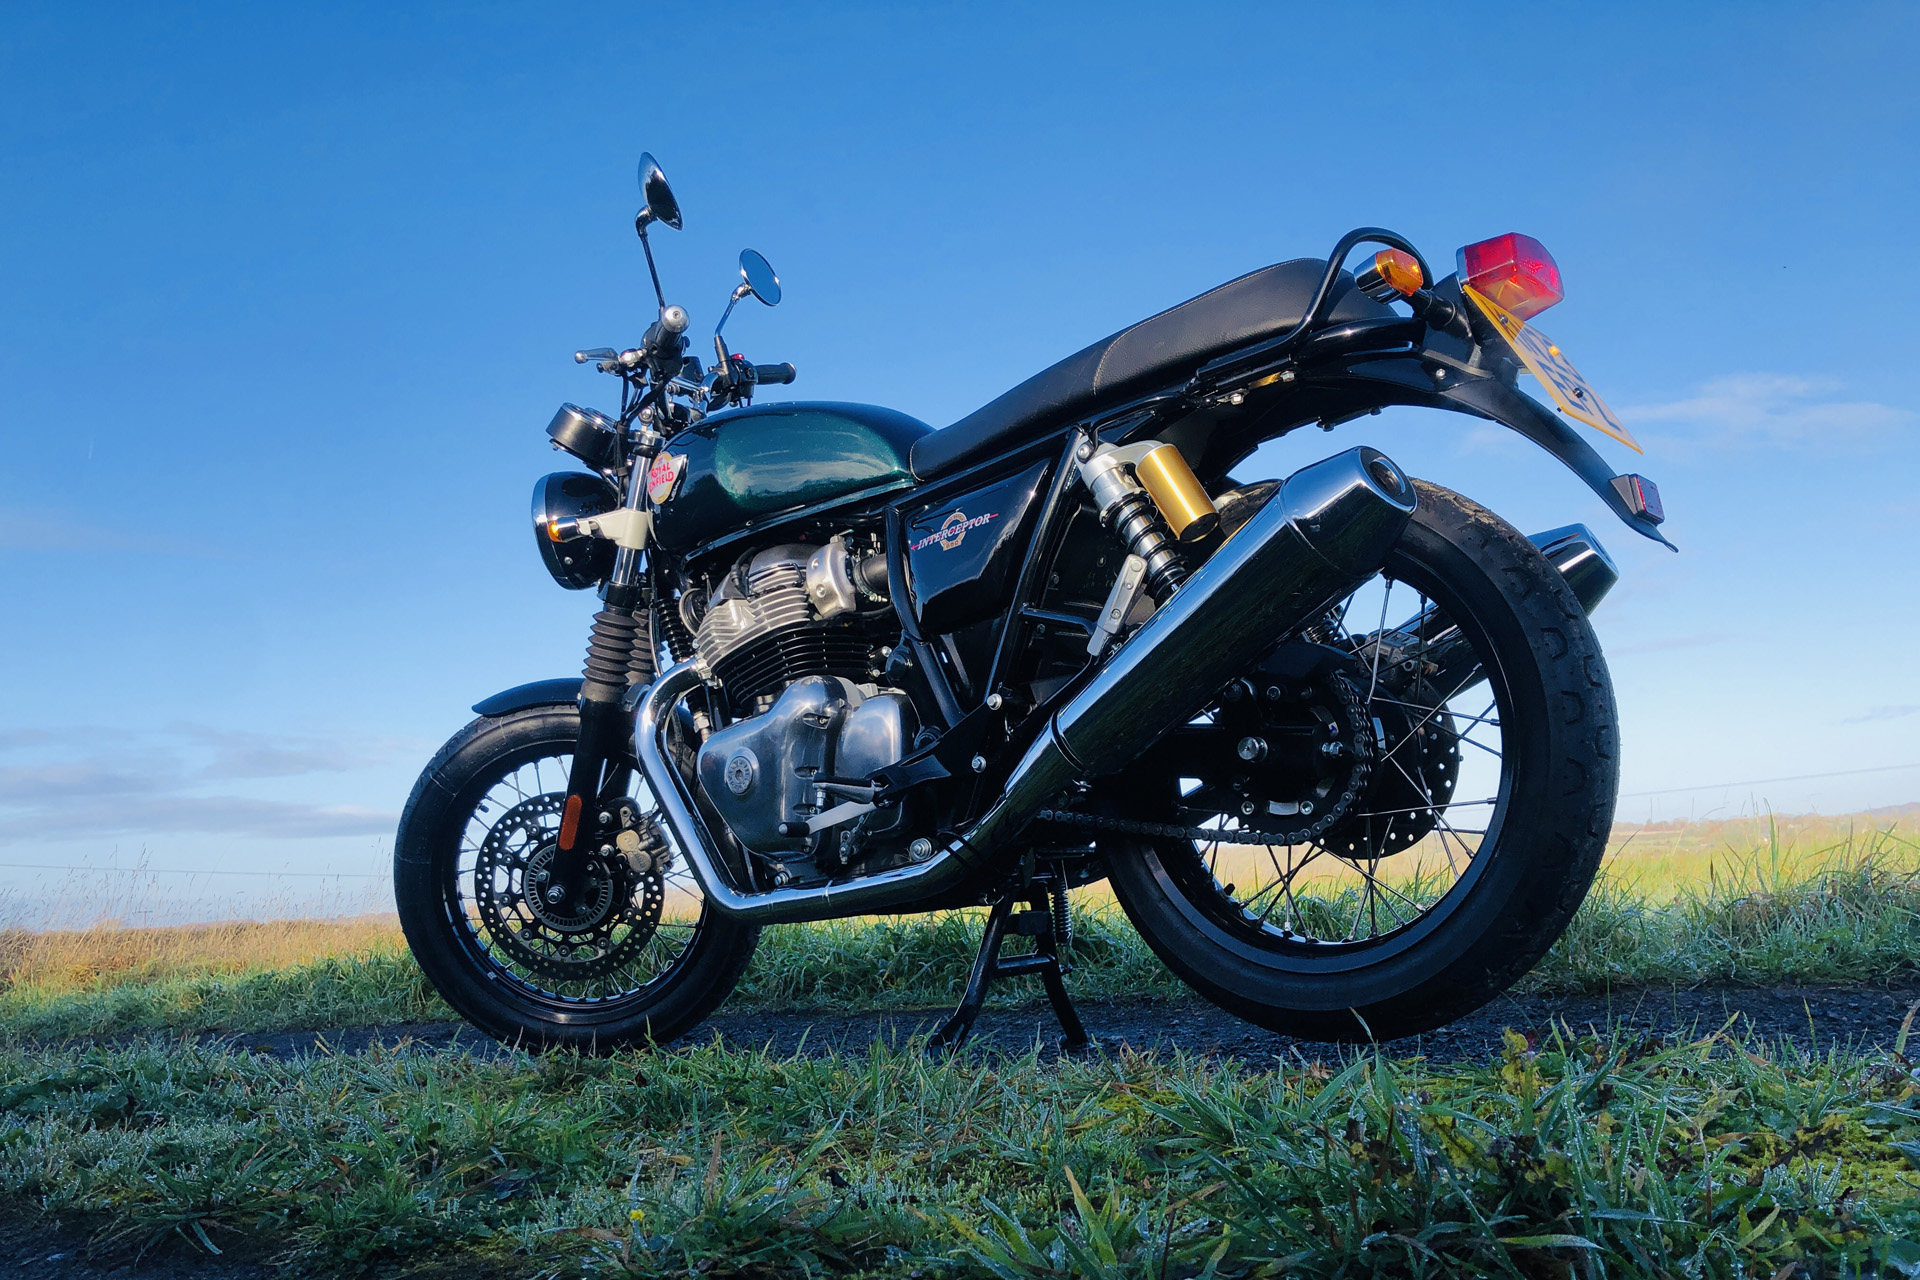 The Royal Enfield Interceptor against a blue sky in a field